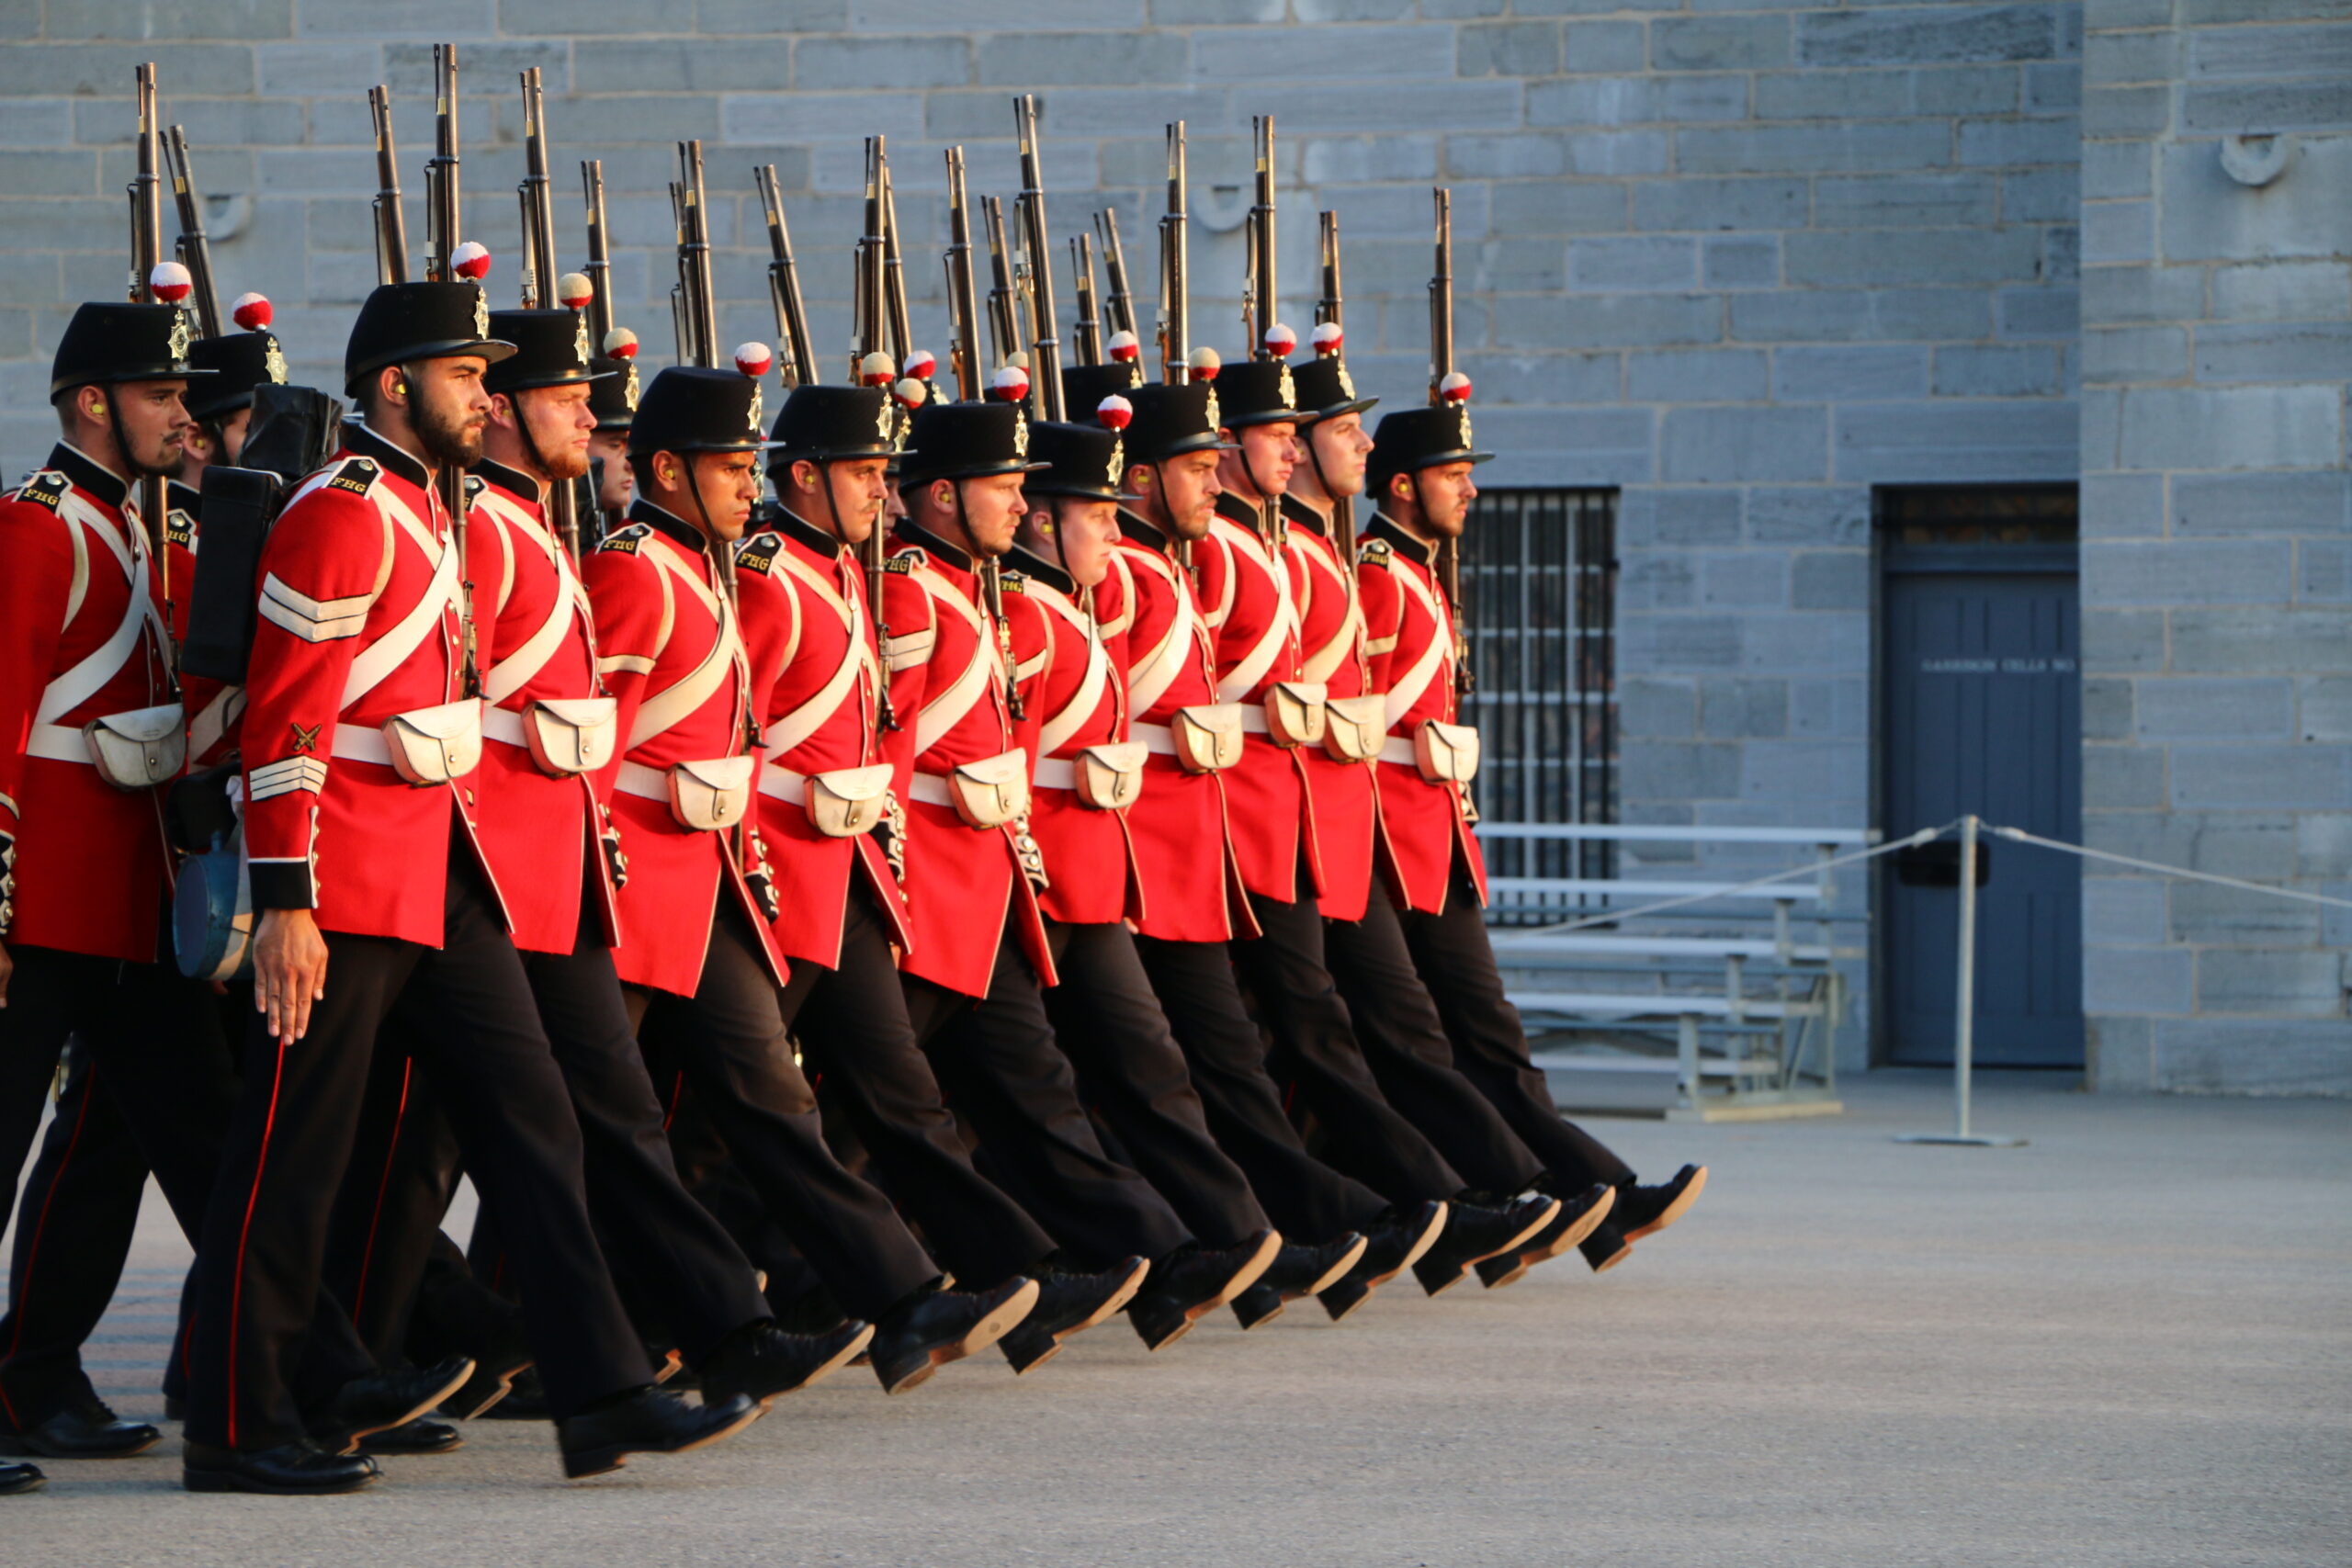 Fort Henry Guard in red military uniforms marching on the Parade Square.